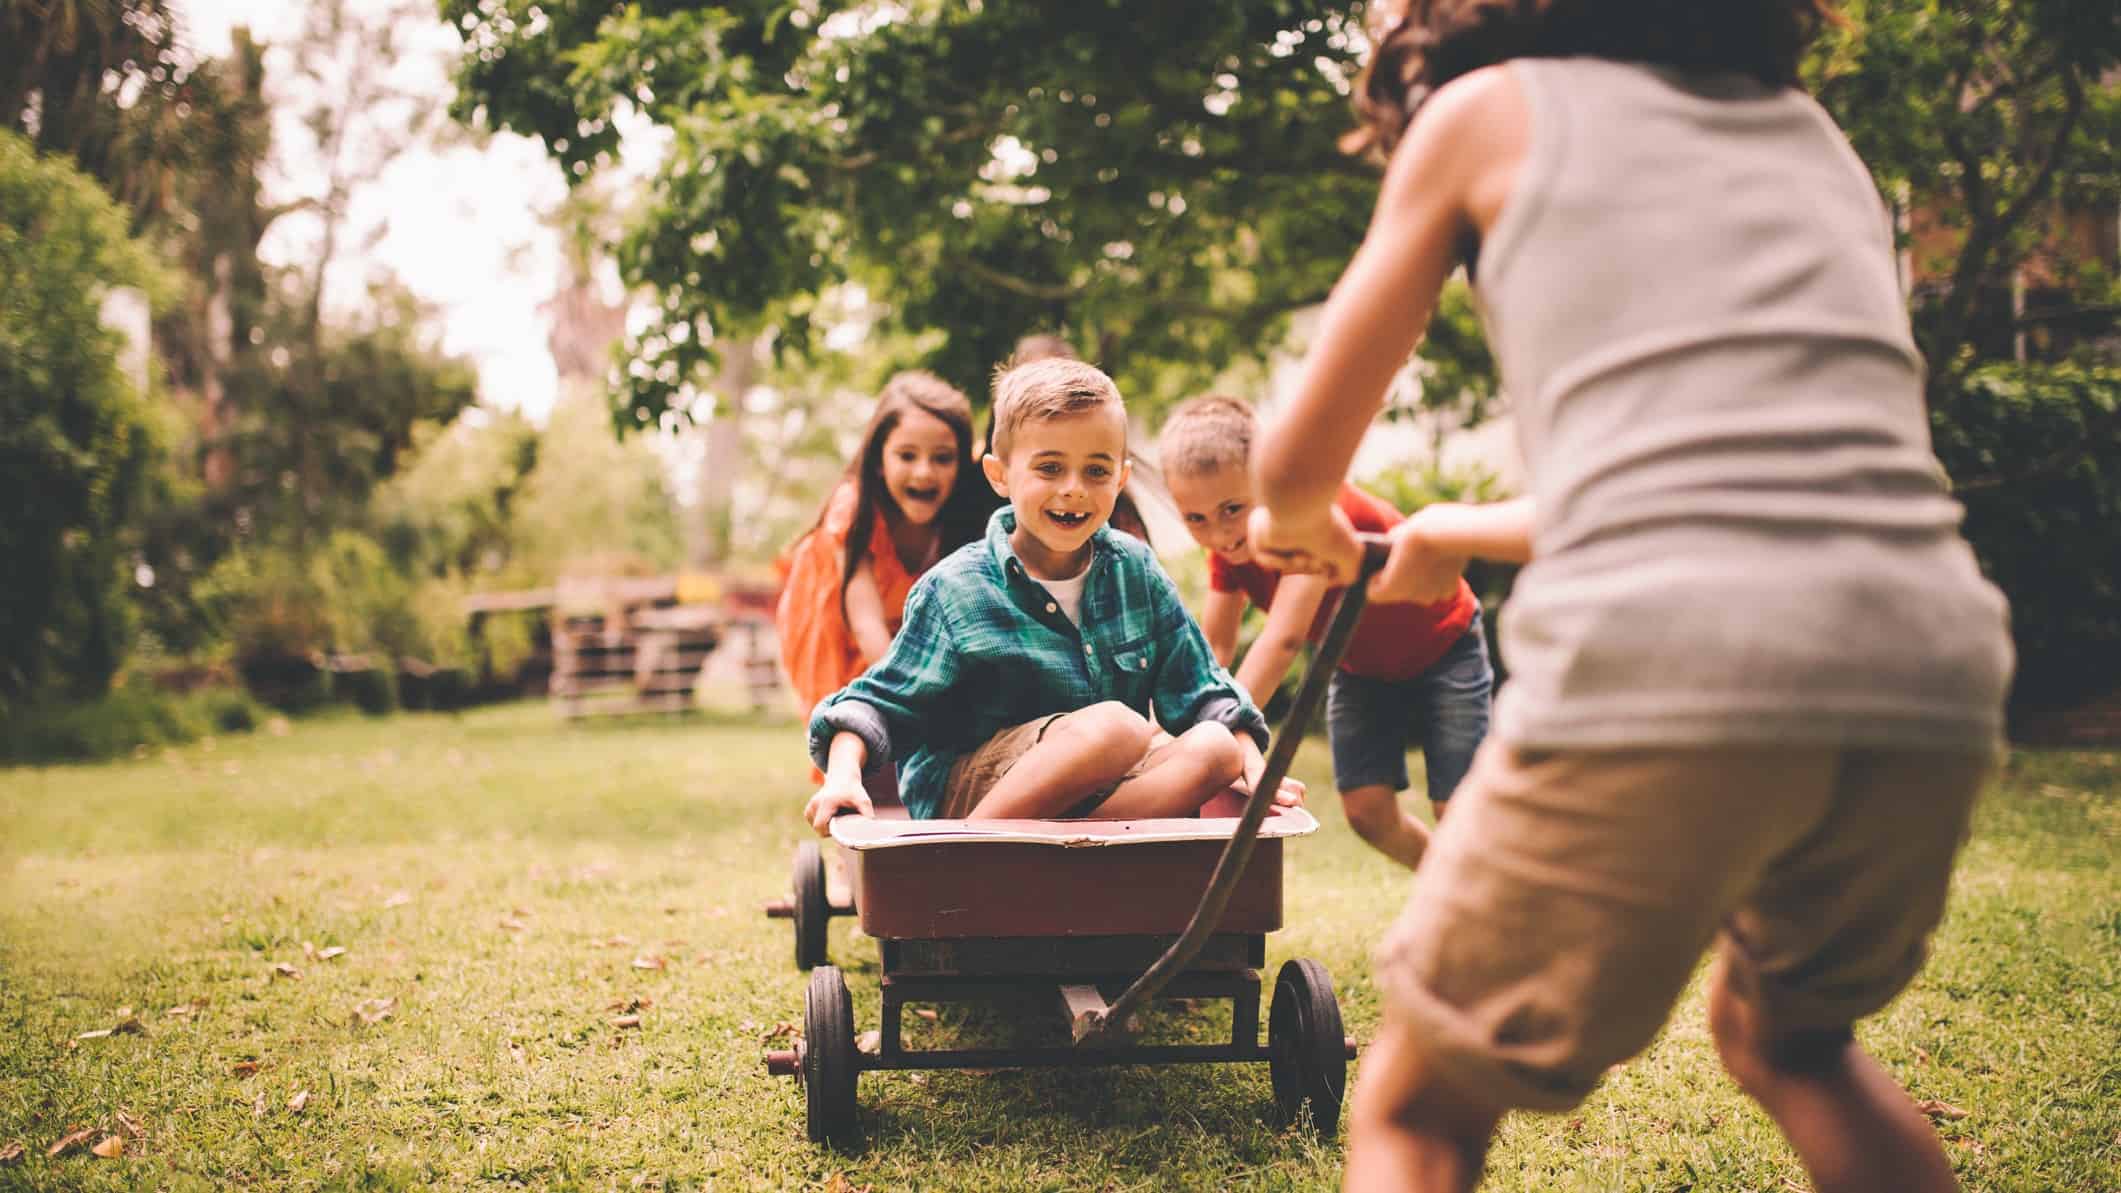 A kid pulls his friends on a wagon in the backyard.